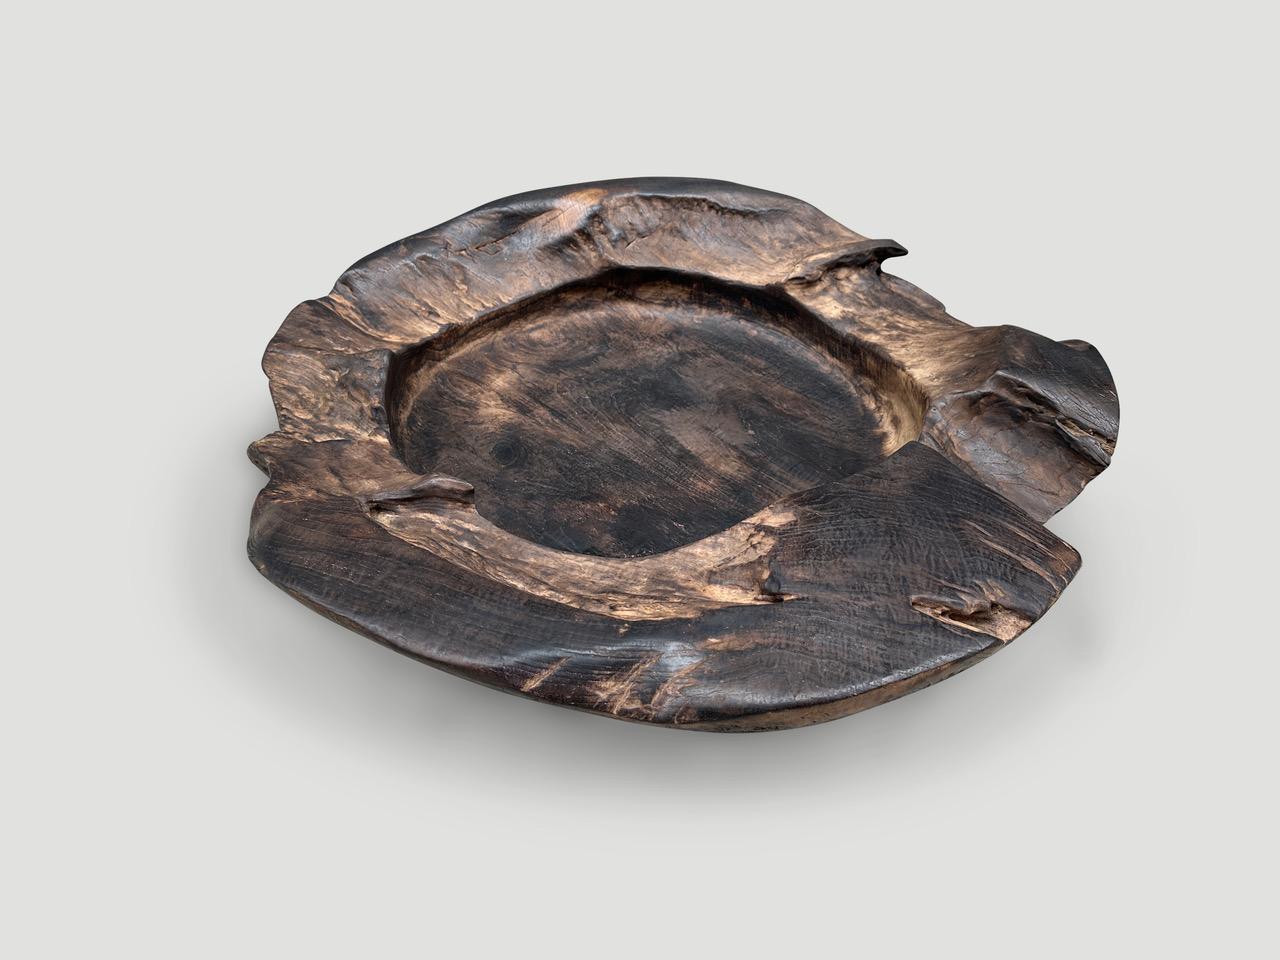 Impressive size on this reclaimed teak sculptural vessel. Great as an art object or useful to hold towels or magazines to name a few suggestions. Hand carved from a single piece of reclaimed teak wood and charred one time revealing the beautiful